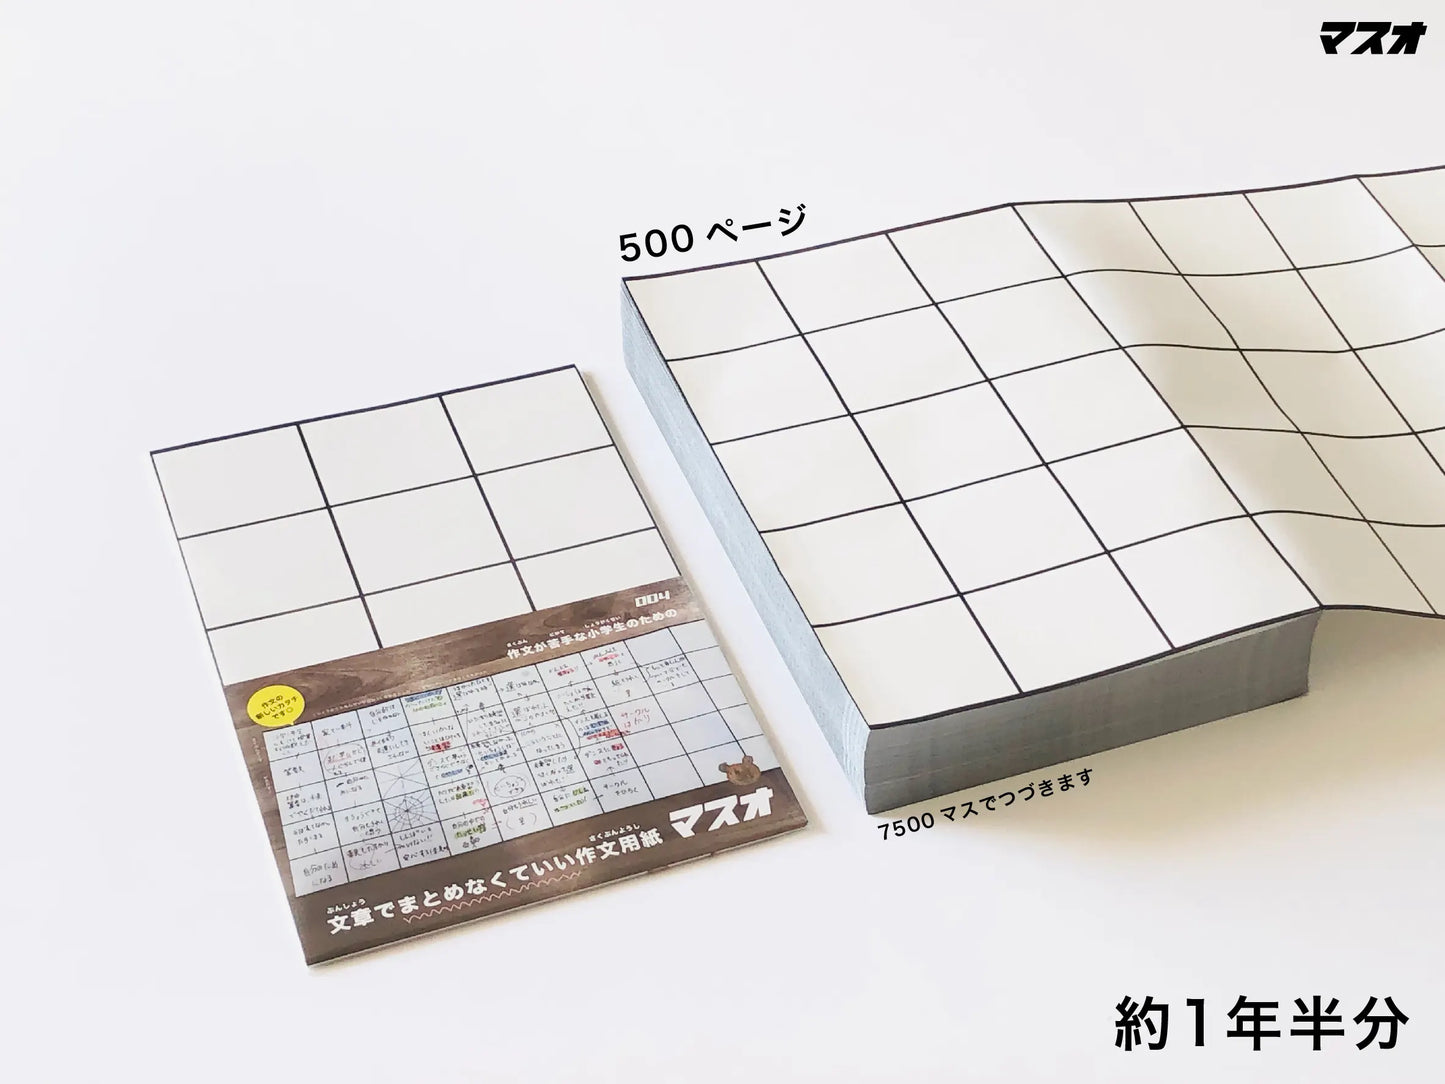 HASSOHO®004 (The ultimate form of sticky note-like conception process)